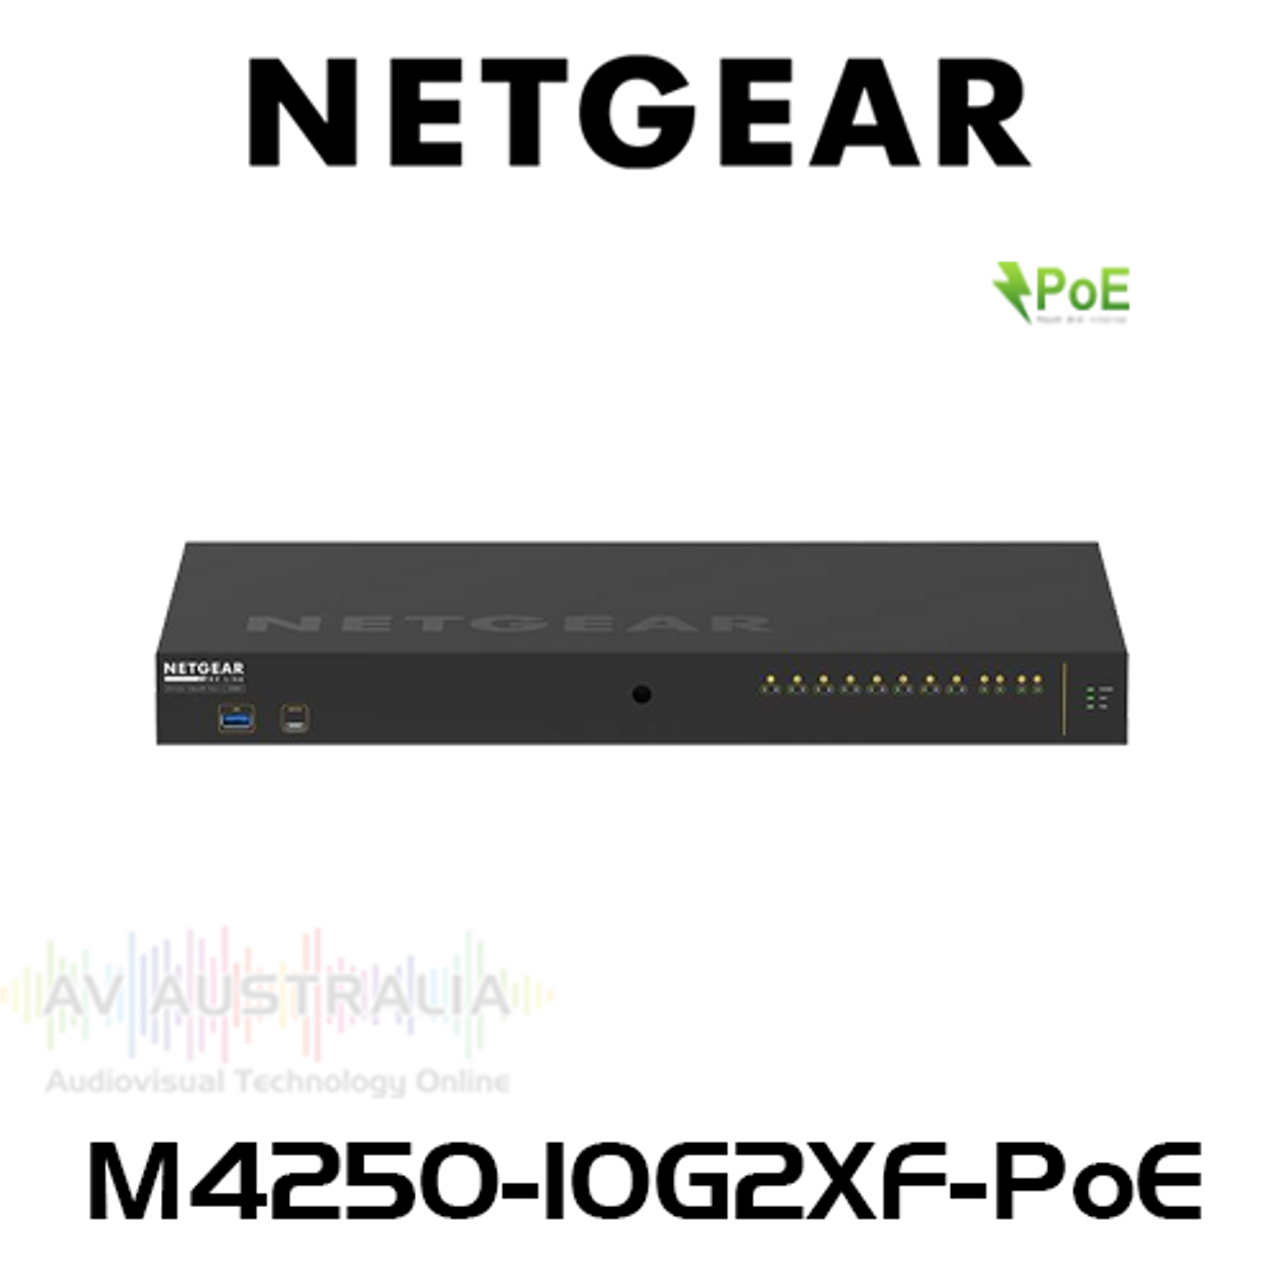 Netgear AV Line M4250-10G2XF-PoE 8x1G Ultra90 PoE 802.3bt 720W Managed Switch with 2x1G and 2xSFP